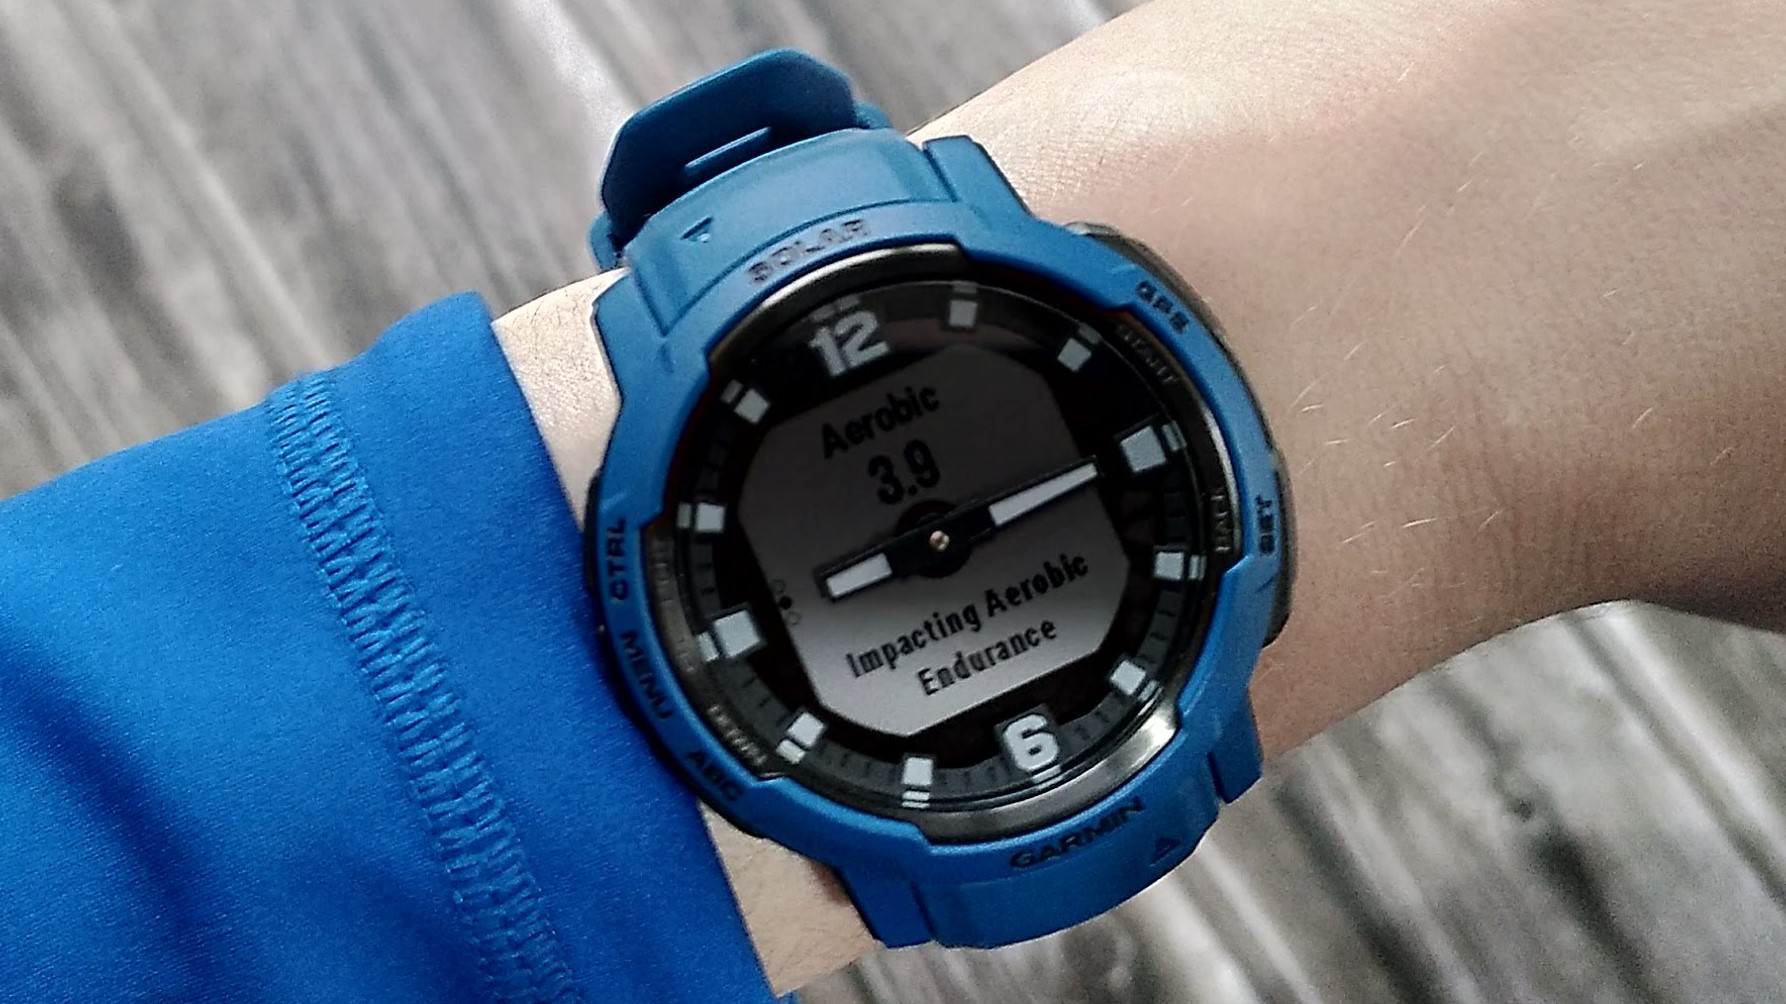 The new Garmin Instinct 2 series includes a surprising special edition